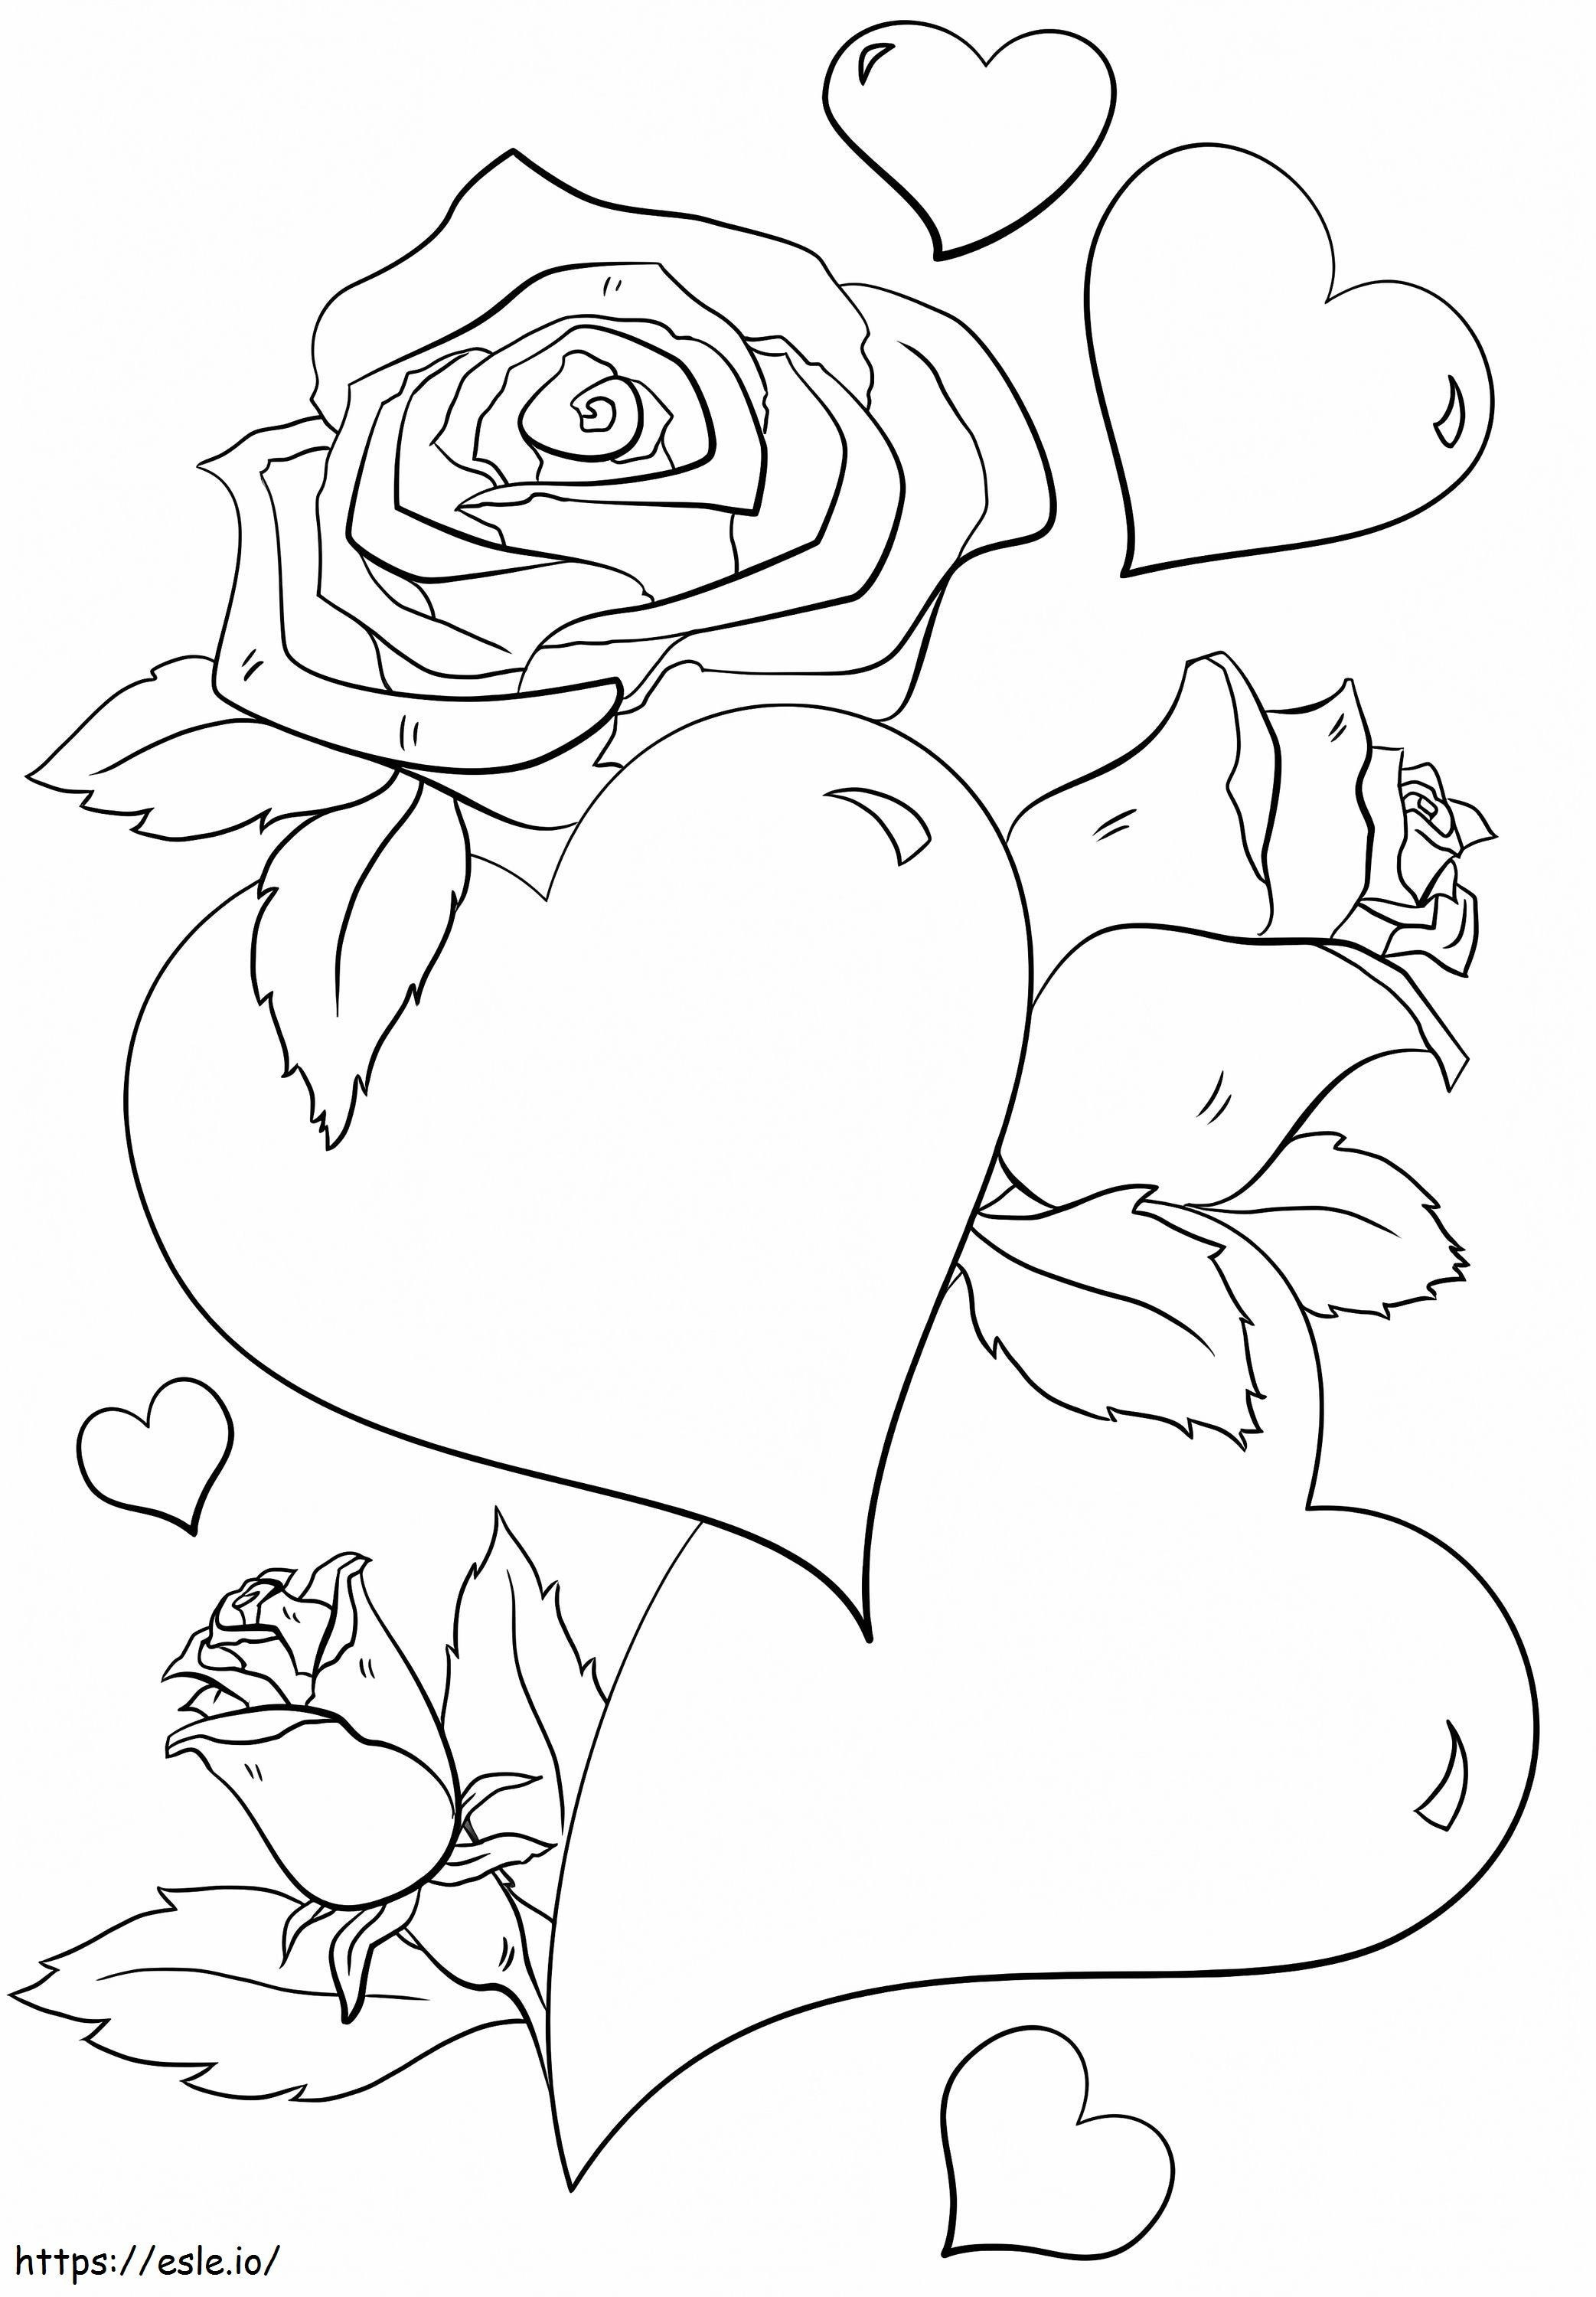 Roses Hearts coloring page